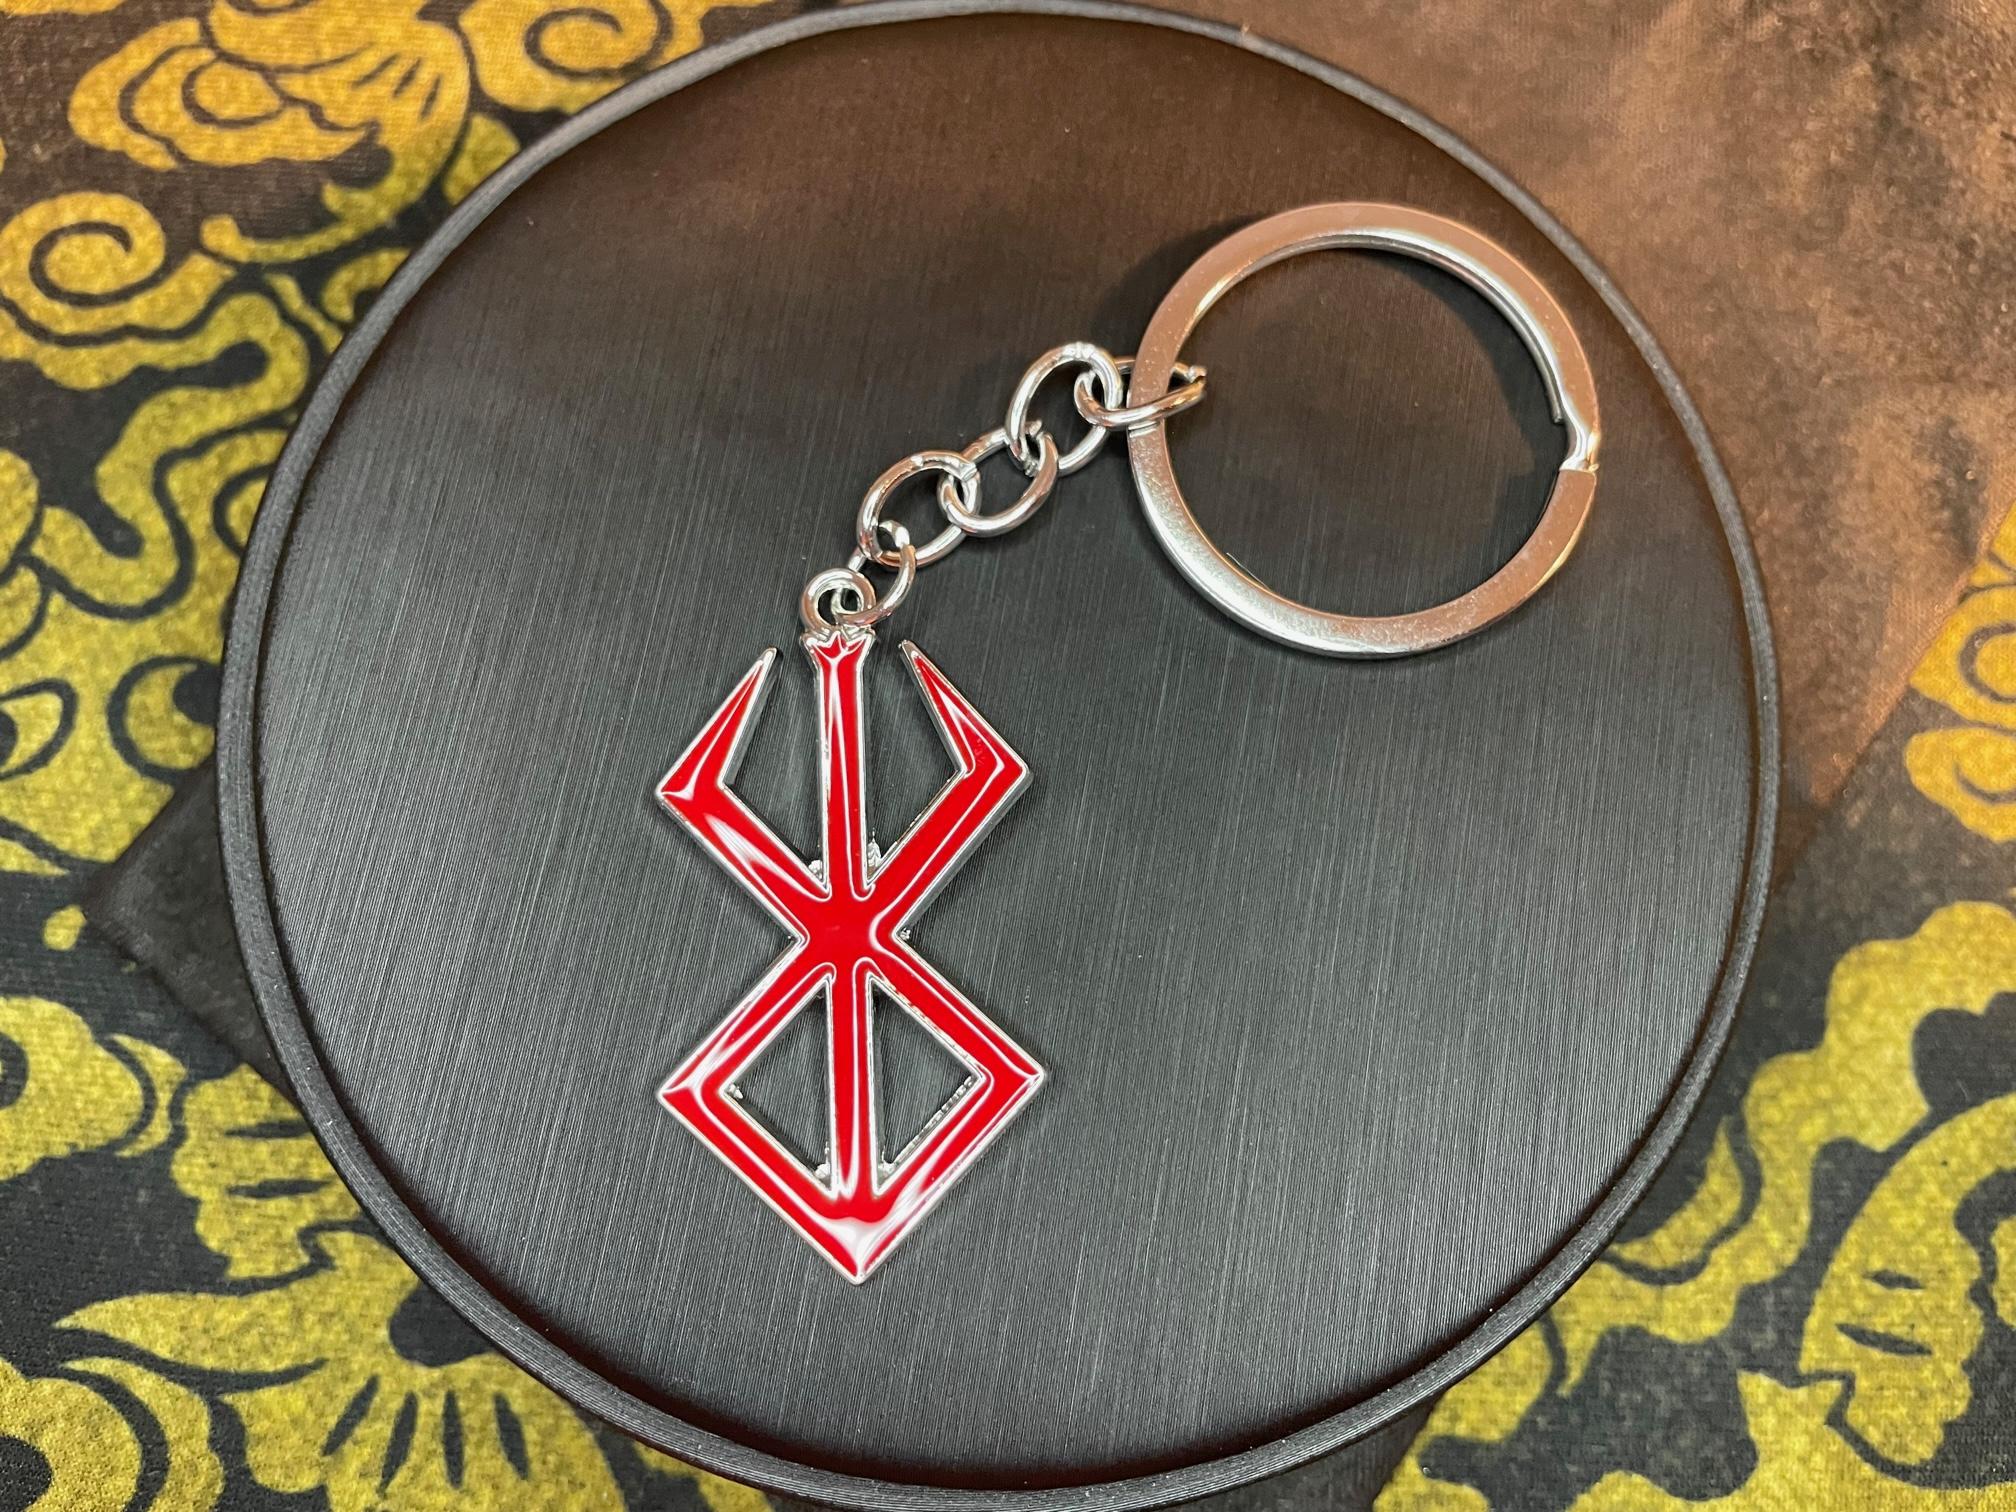 berserk symbol viking nordic norse mad warrior thor odin pendant keychain red satanic wiccan occult darkness jewelry